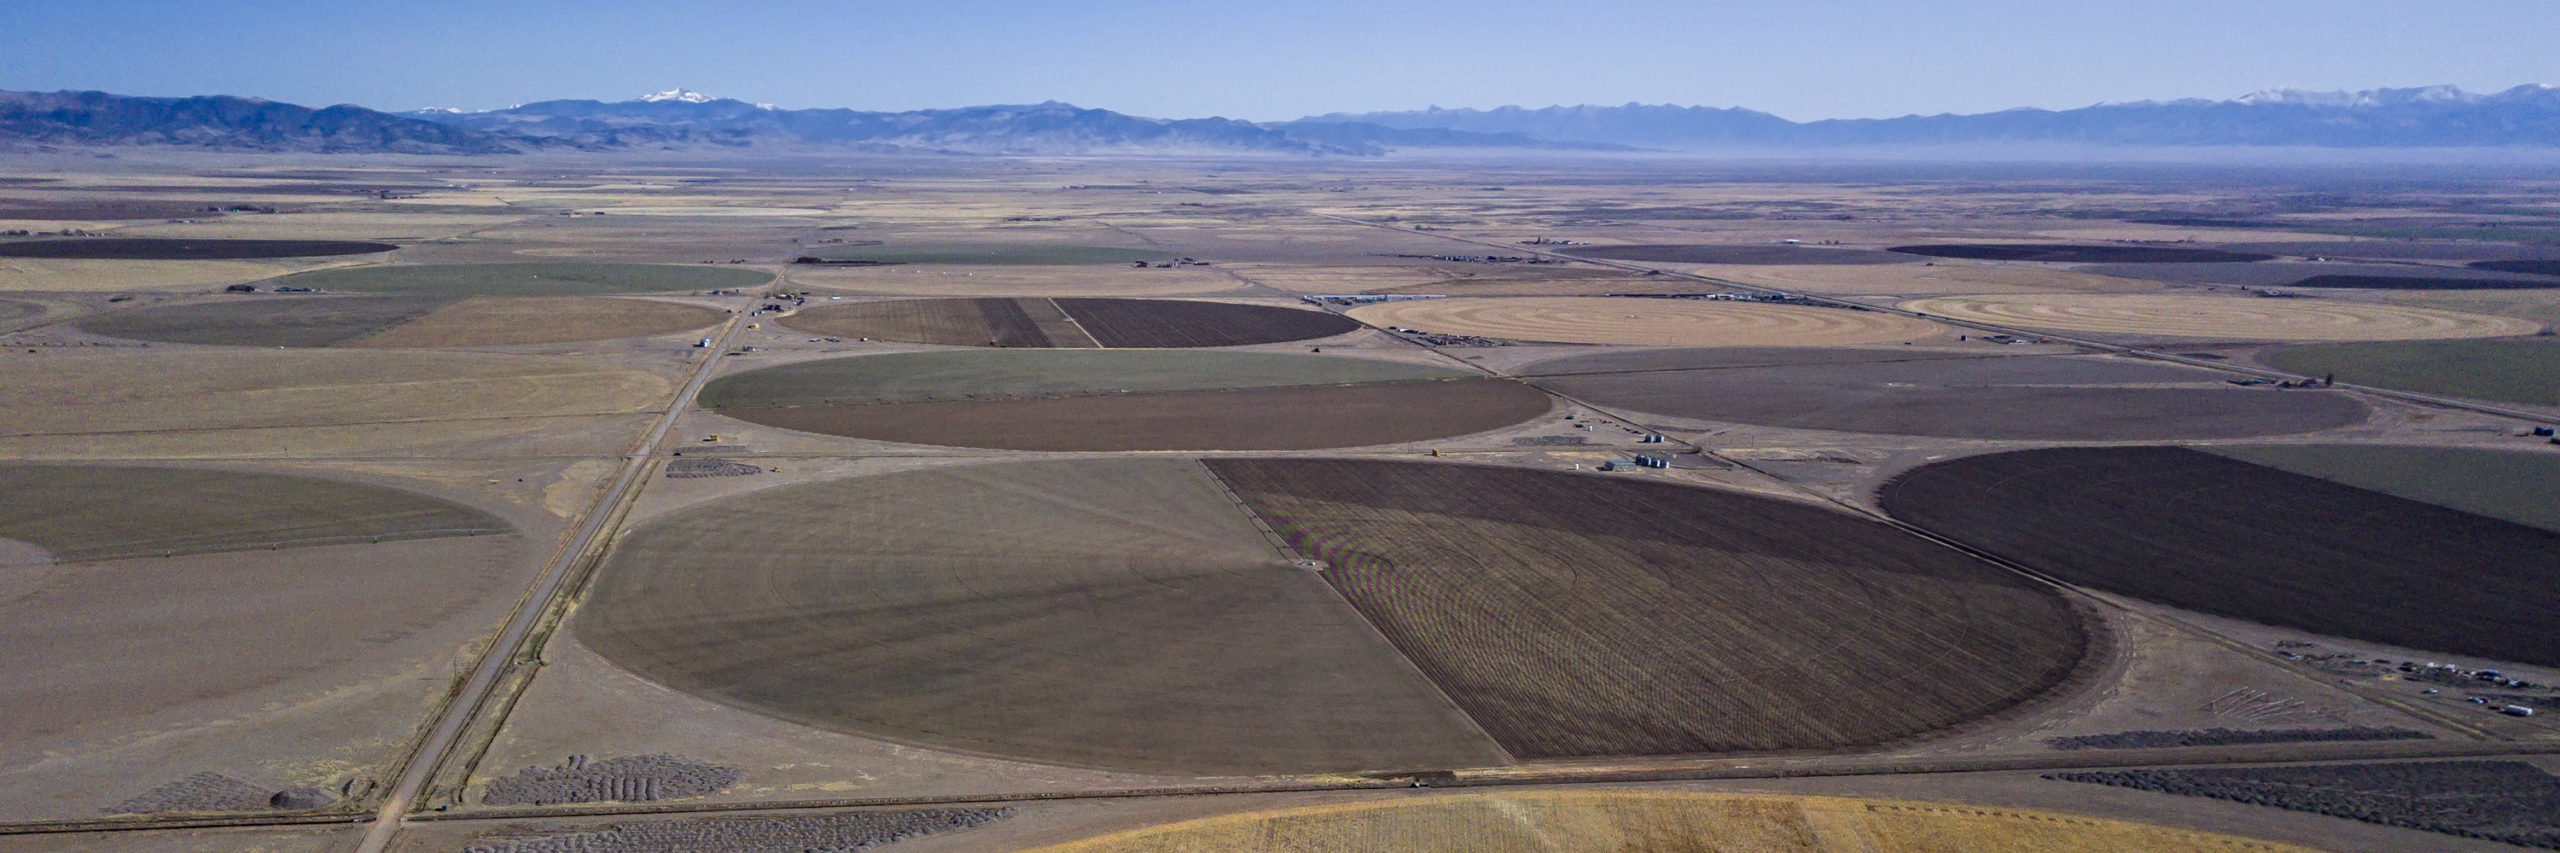 aerial view of irrigated crop circles in the San Luis Valley